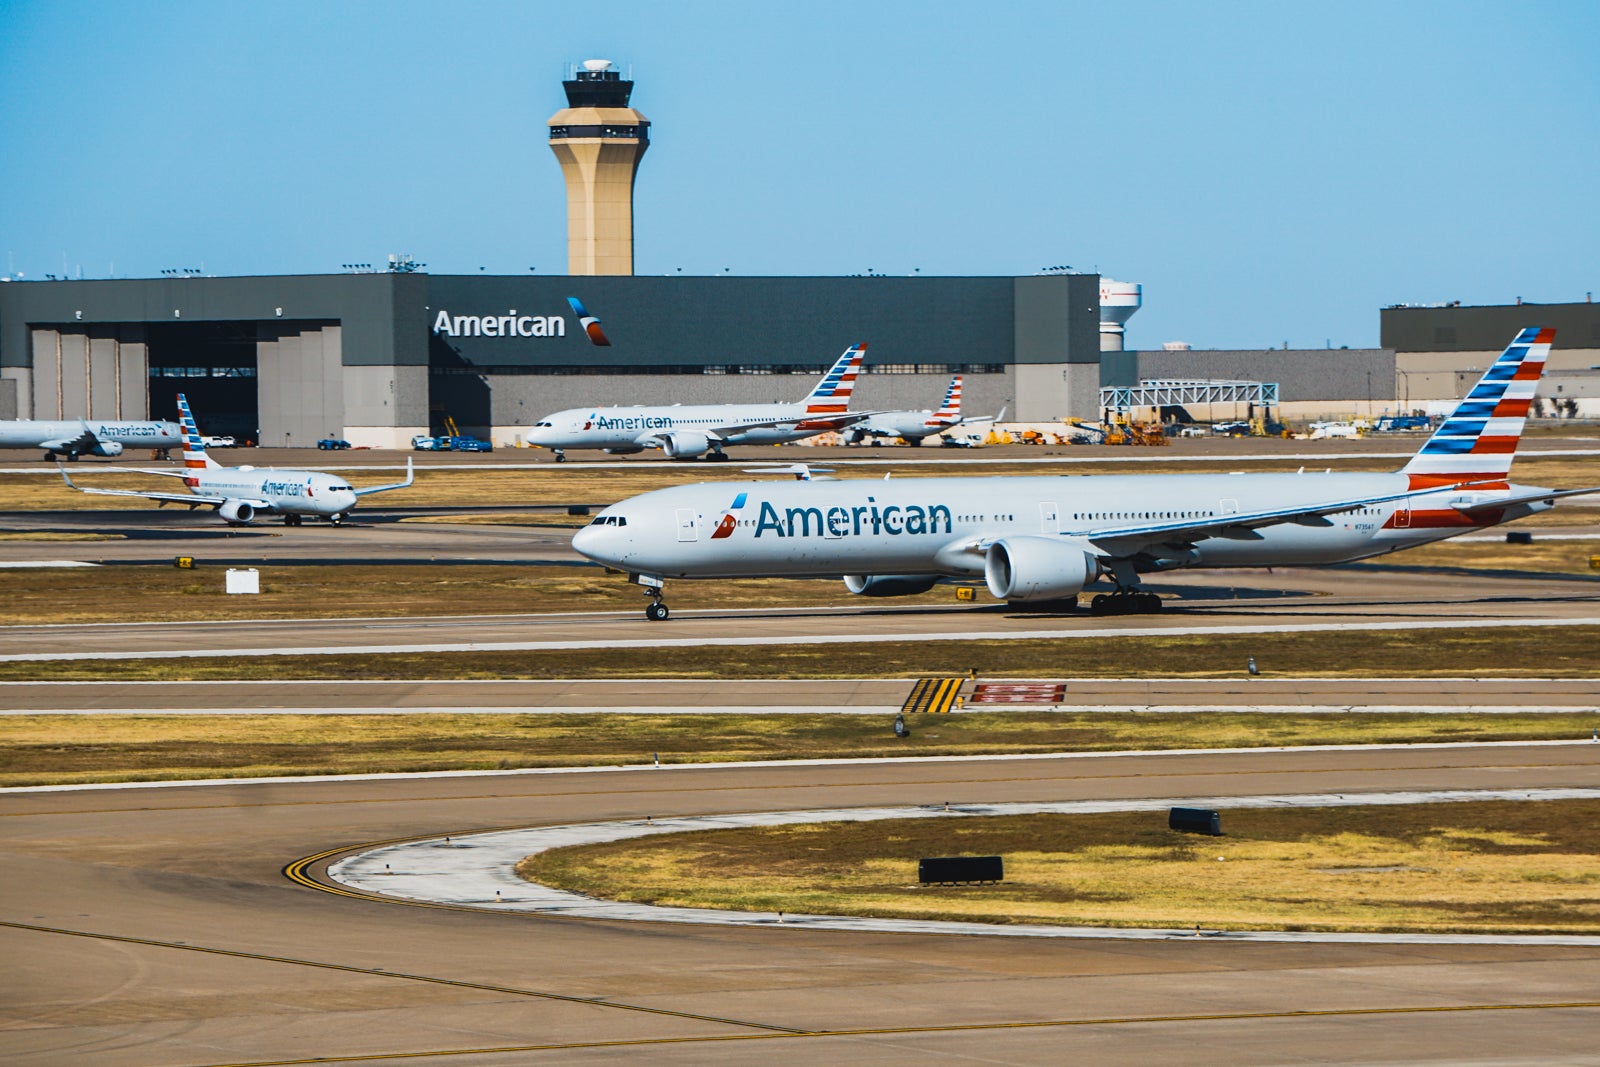 20191028_DFW Airport_American Airlines aircraft on ground in DFW 2_JTGenter